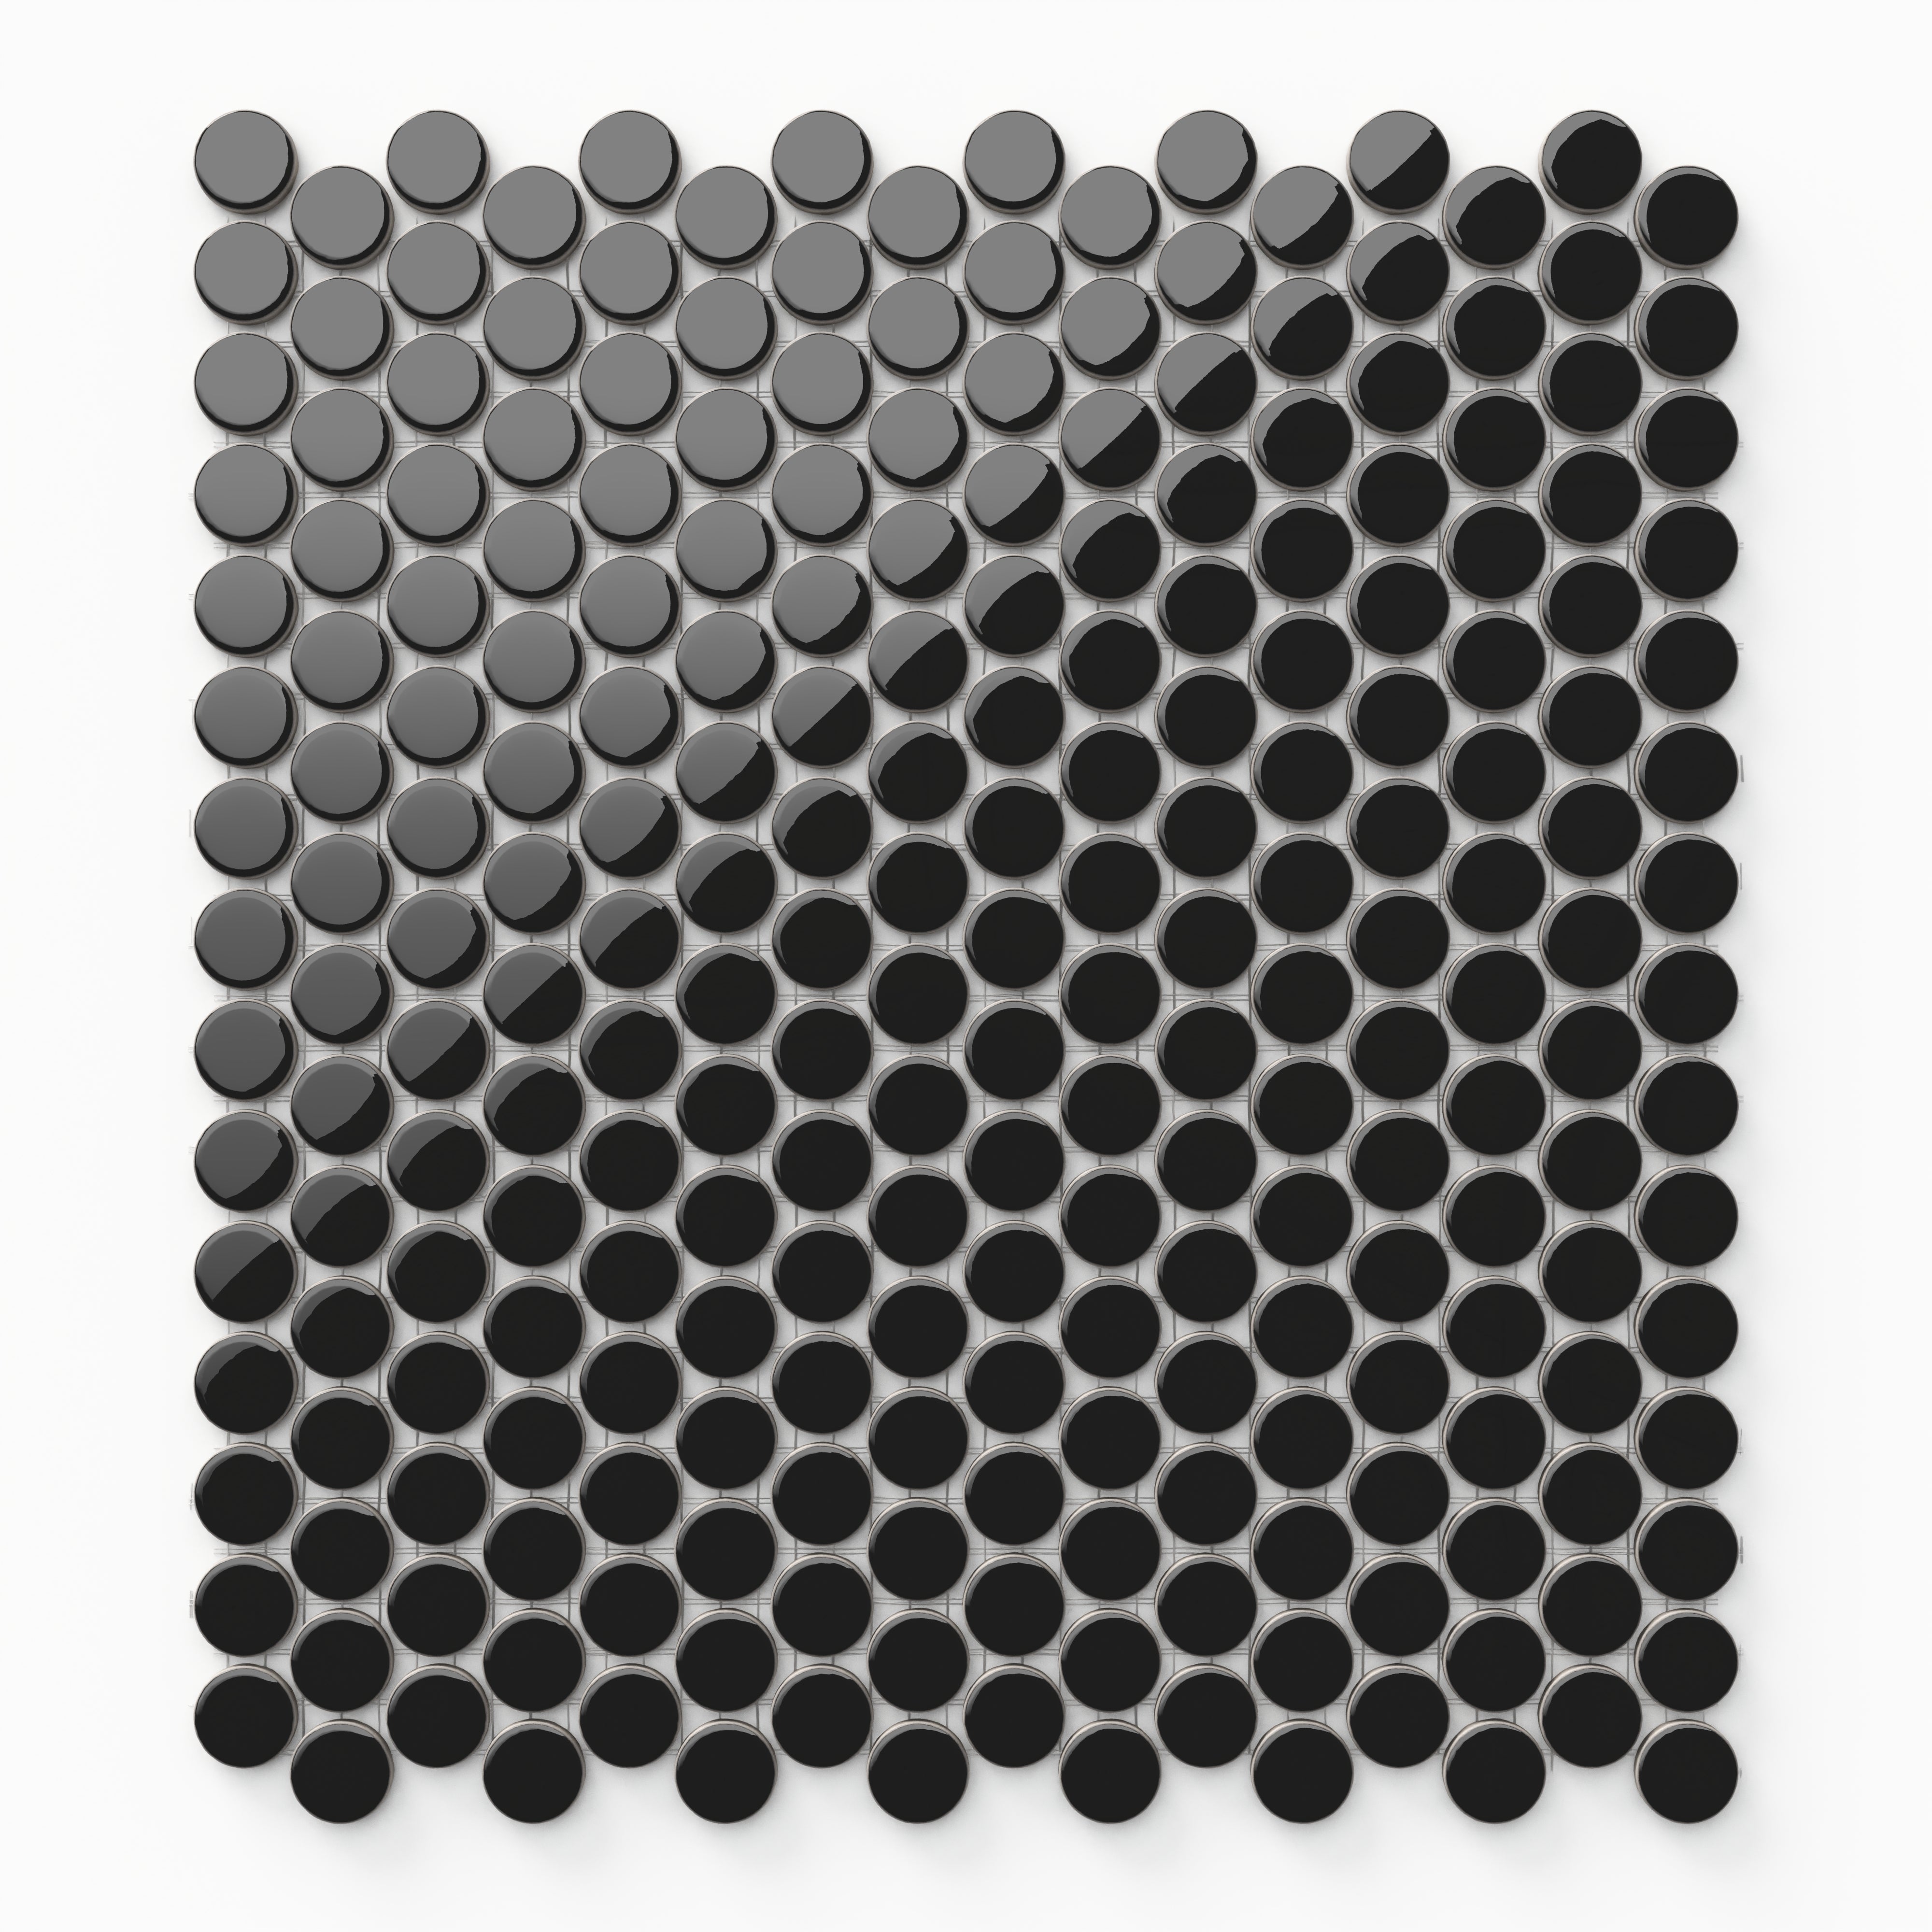 Ollie 3/4x3/4 Glossy Porcelain Mosaic Penny Round Tile in Black